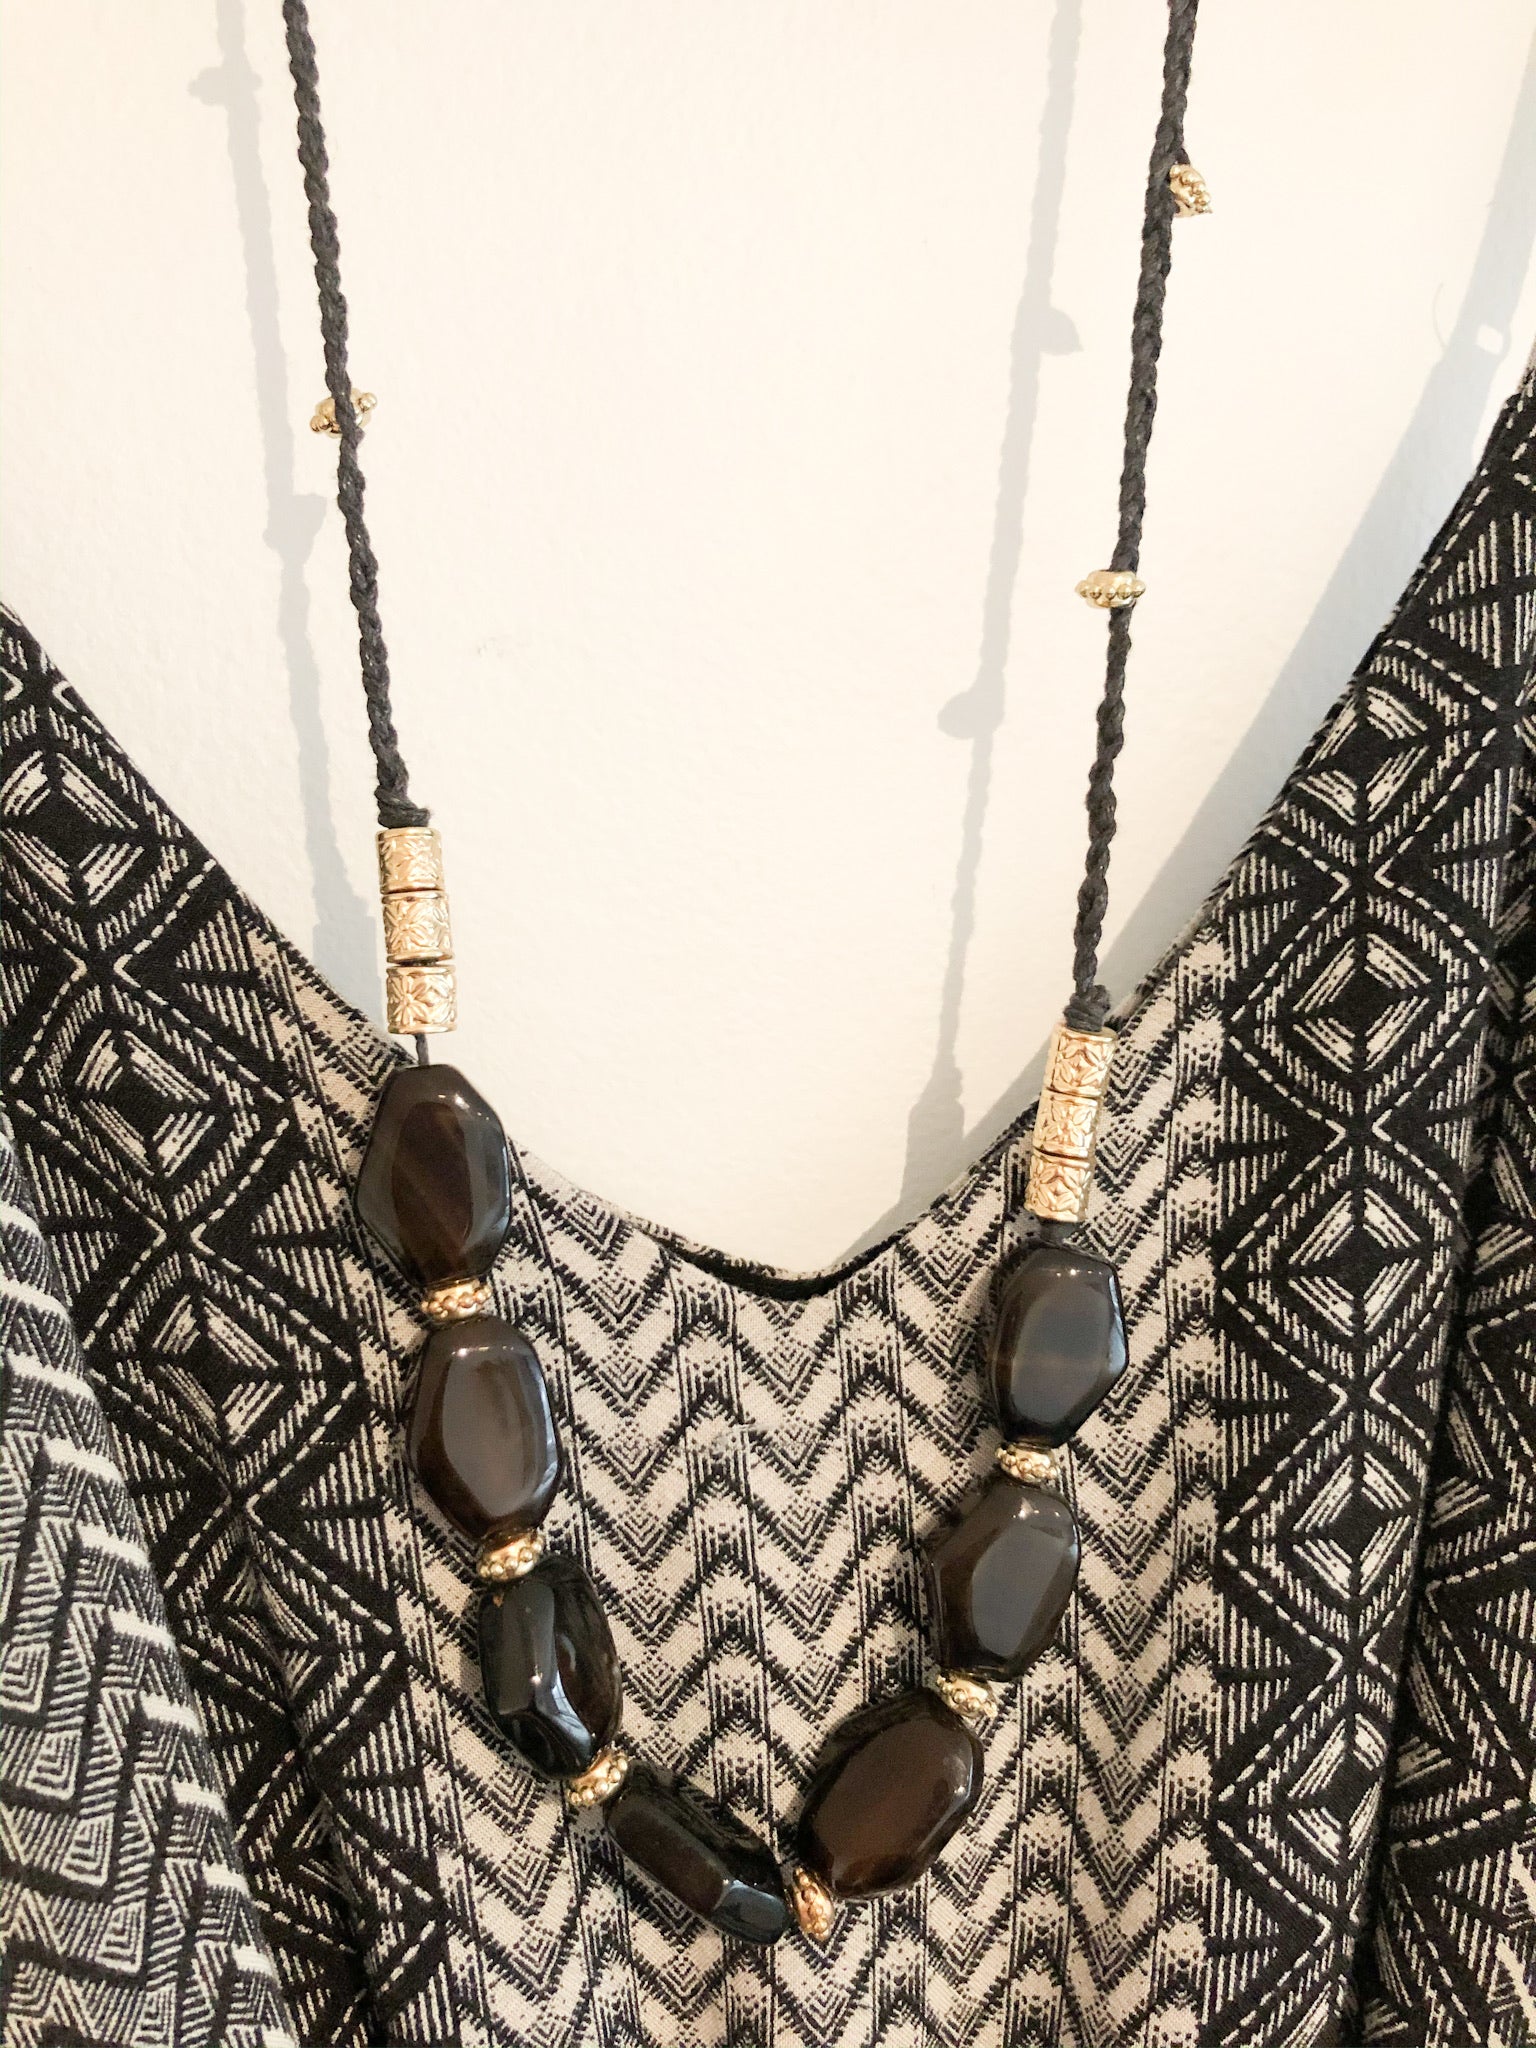 Boho Long Black Stone and Gold Bead Rope Necklace - Le Prix Fashion & Consulting